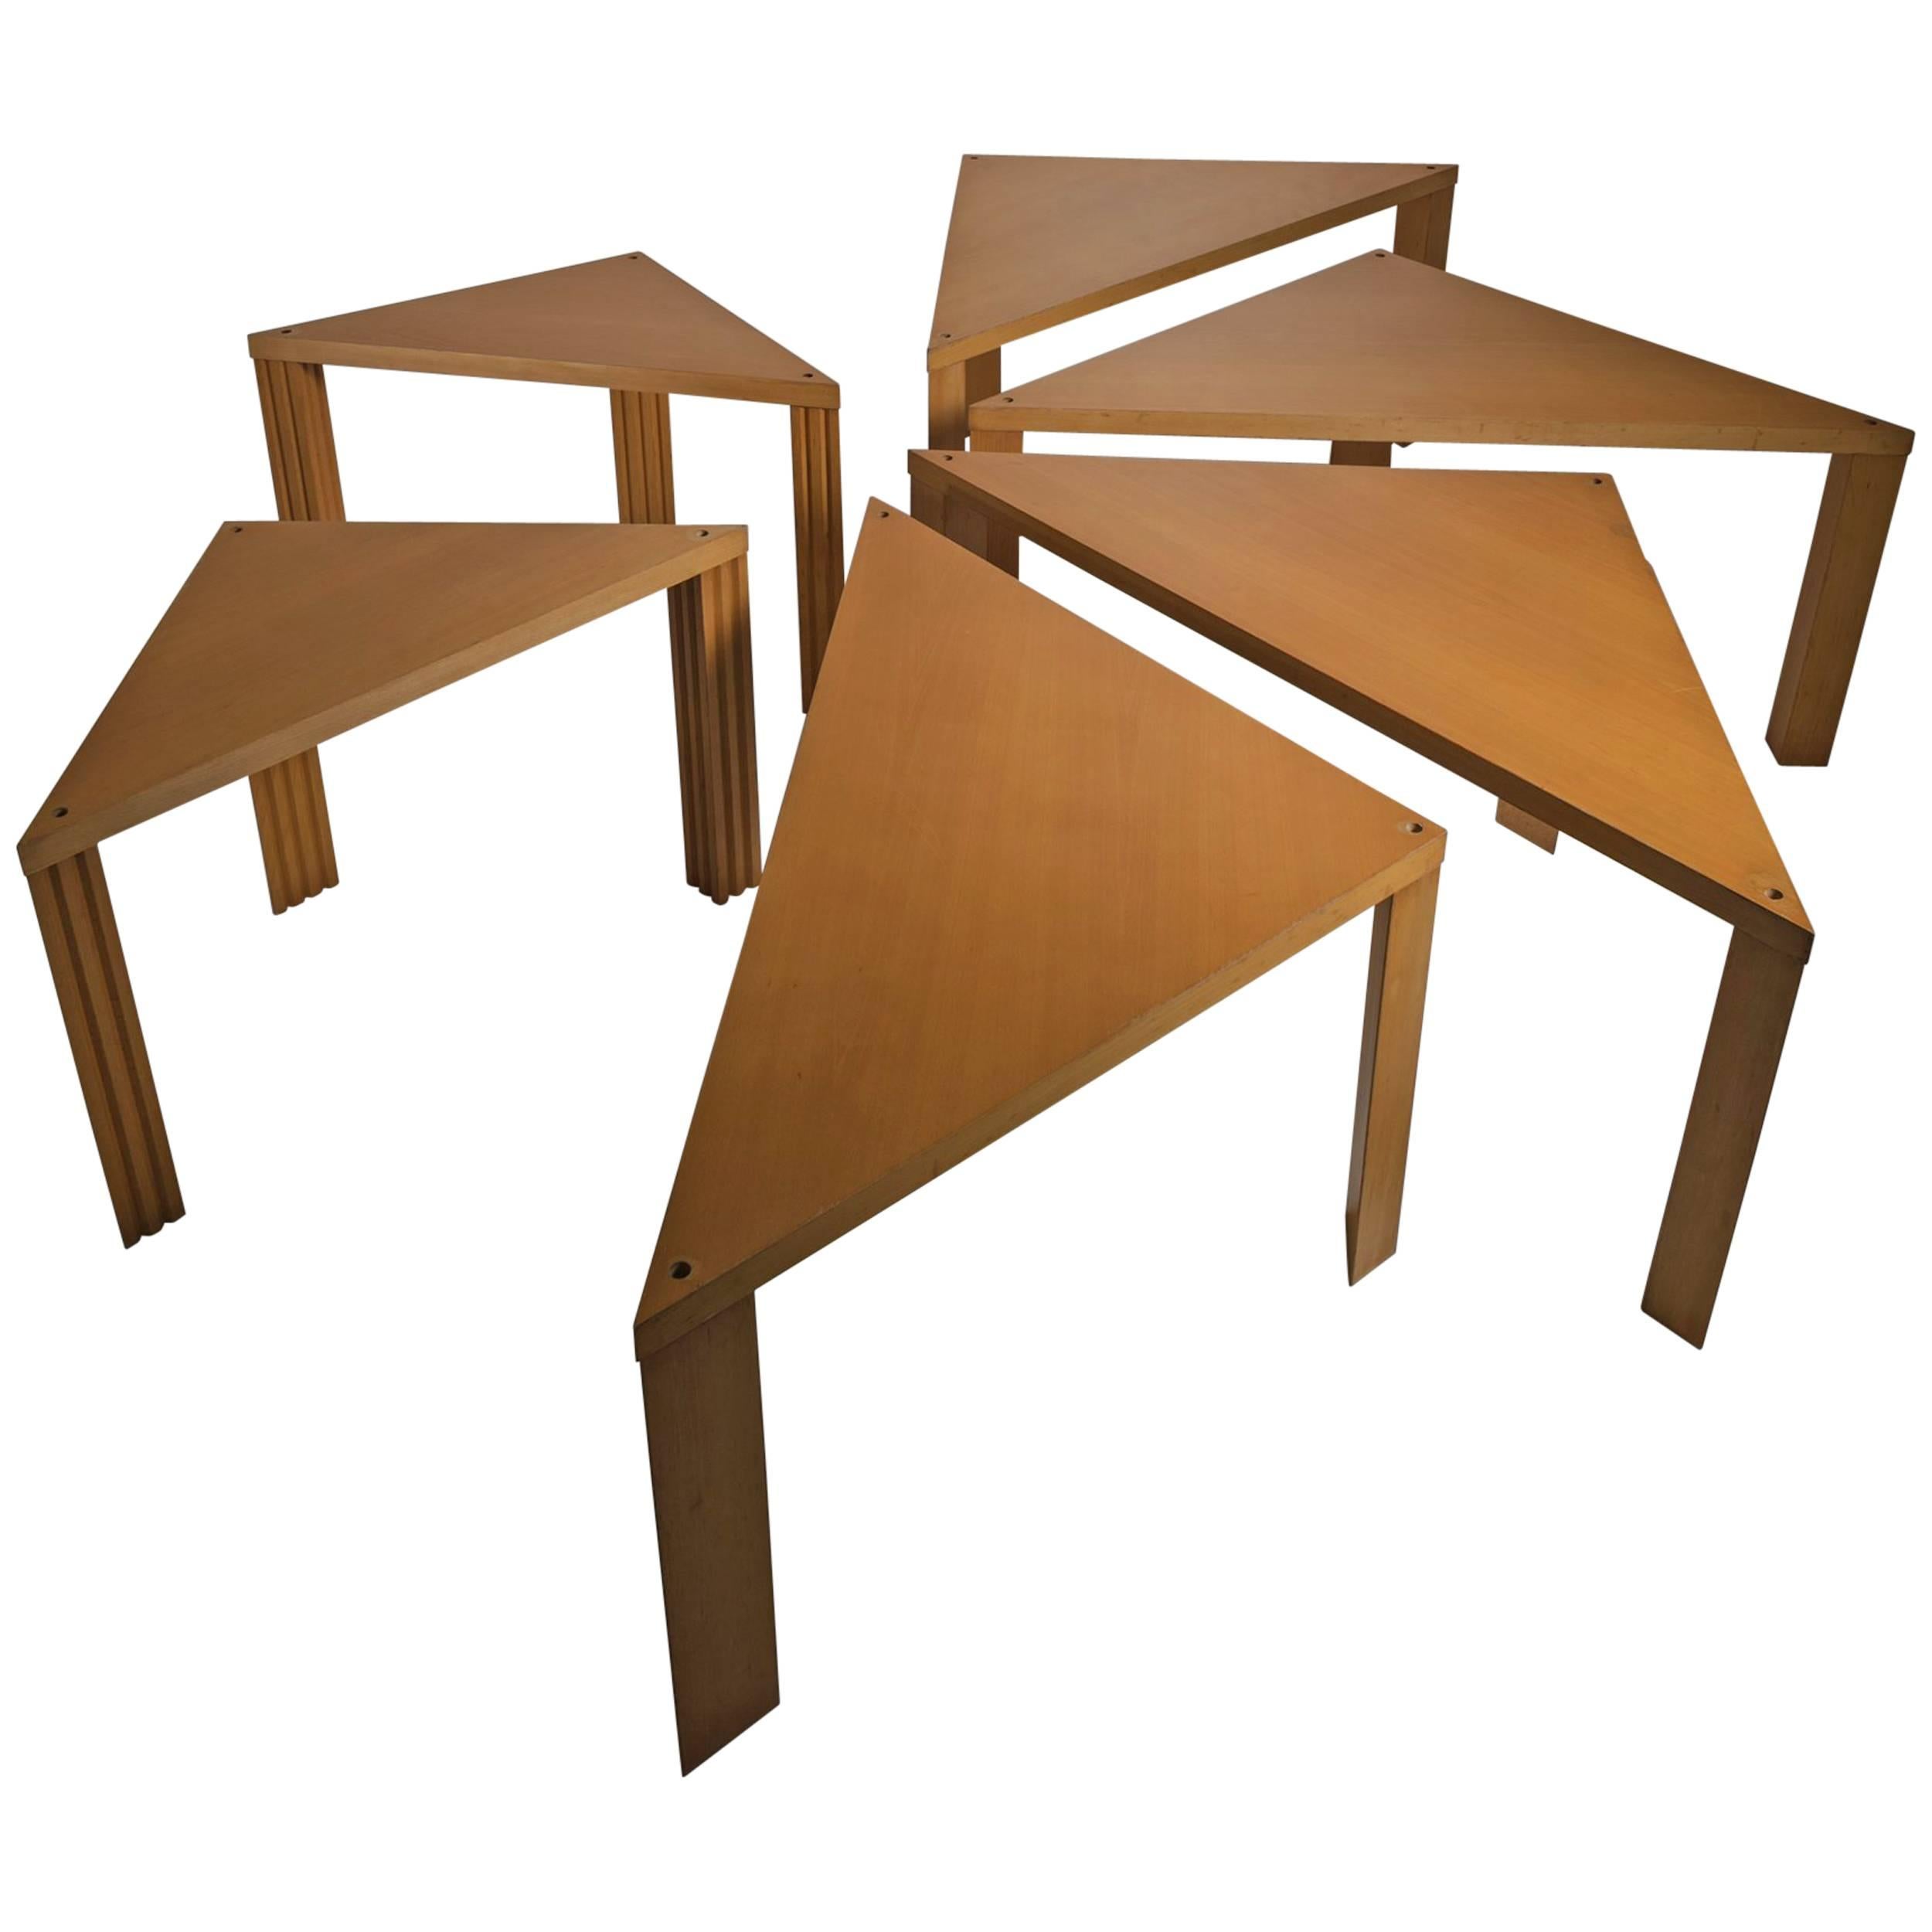 Set of Six "Tangram" Tables by Massimo Morozzi for Cassina